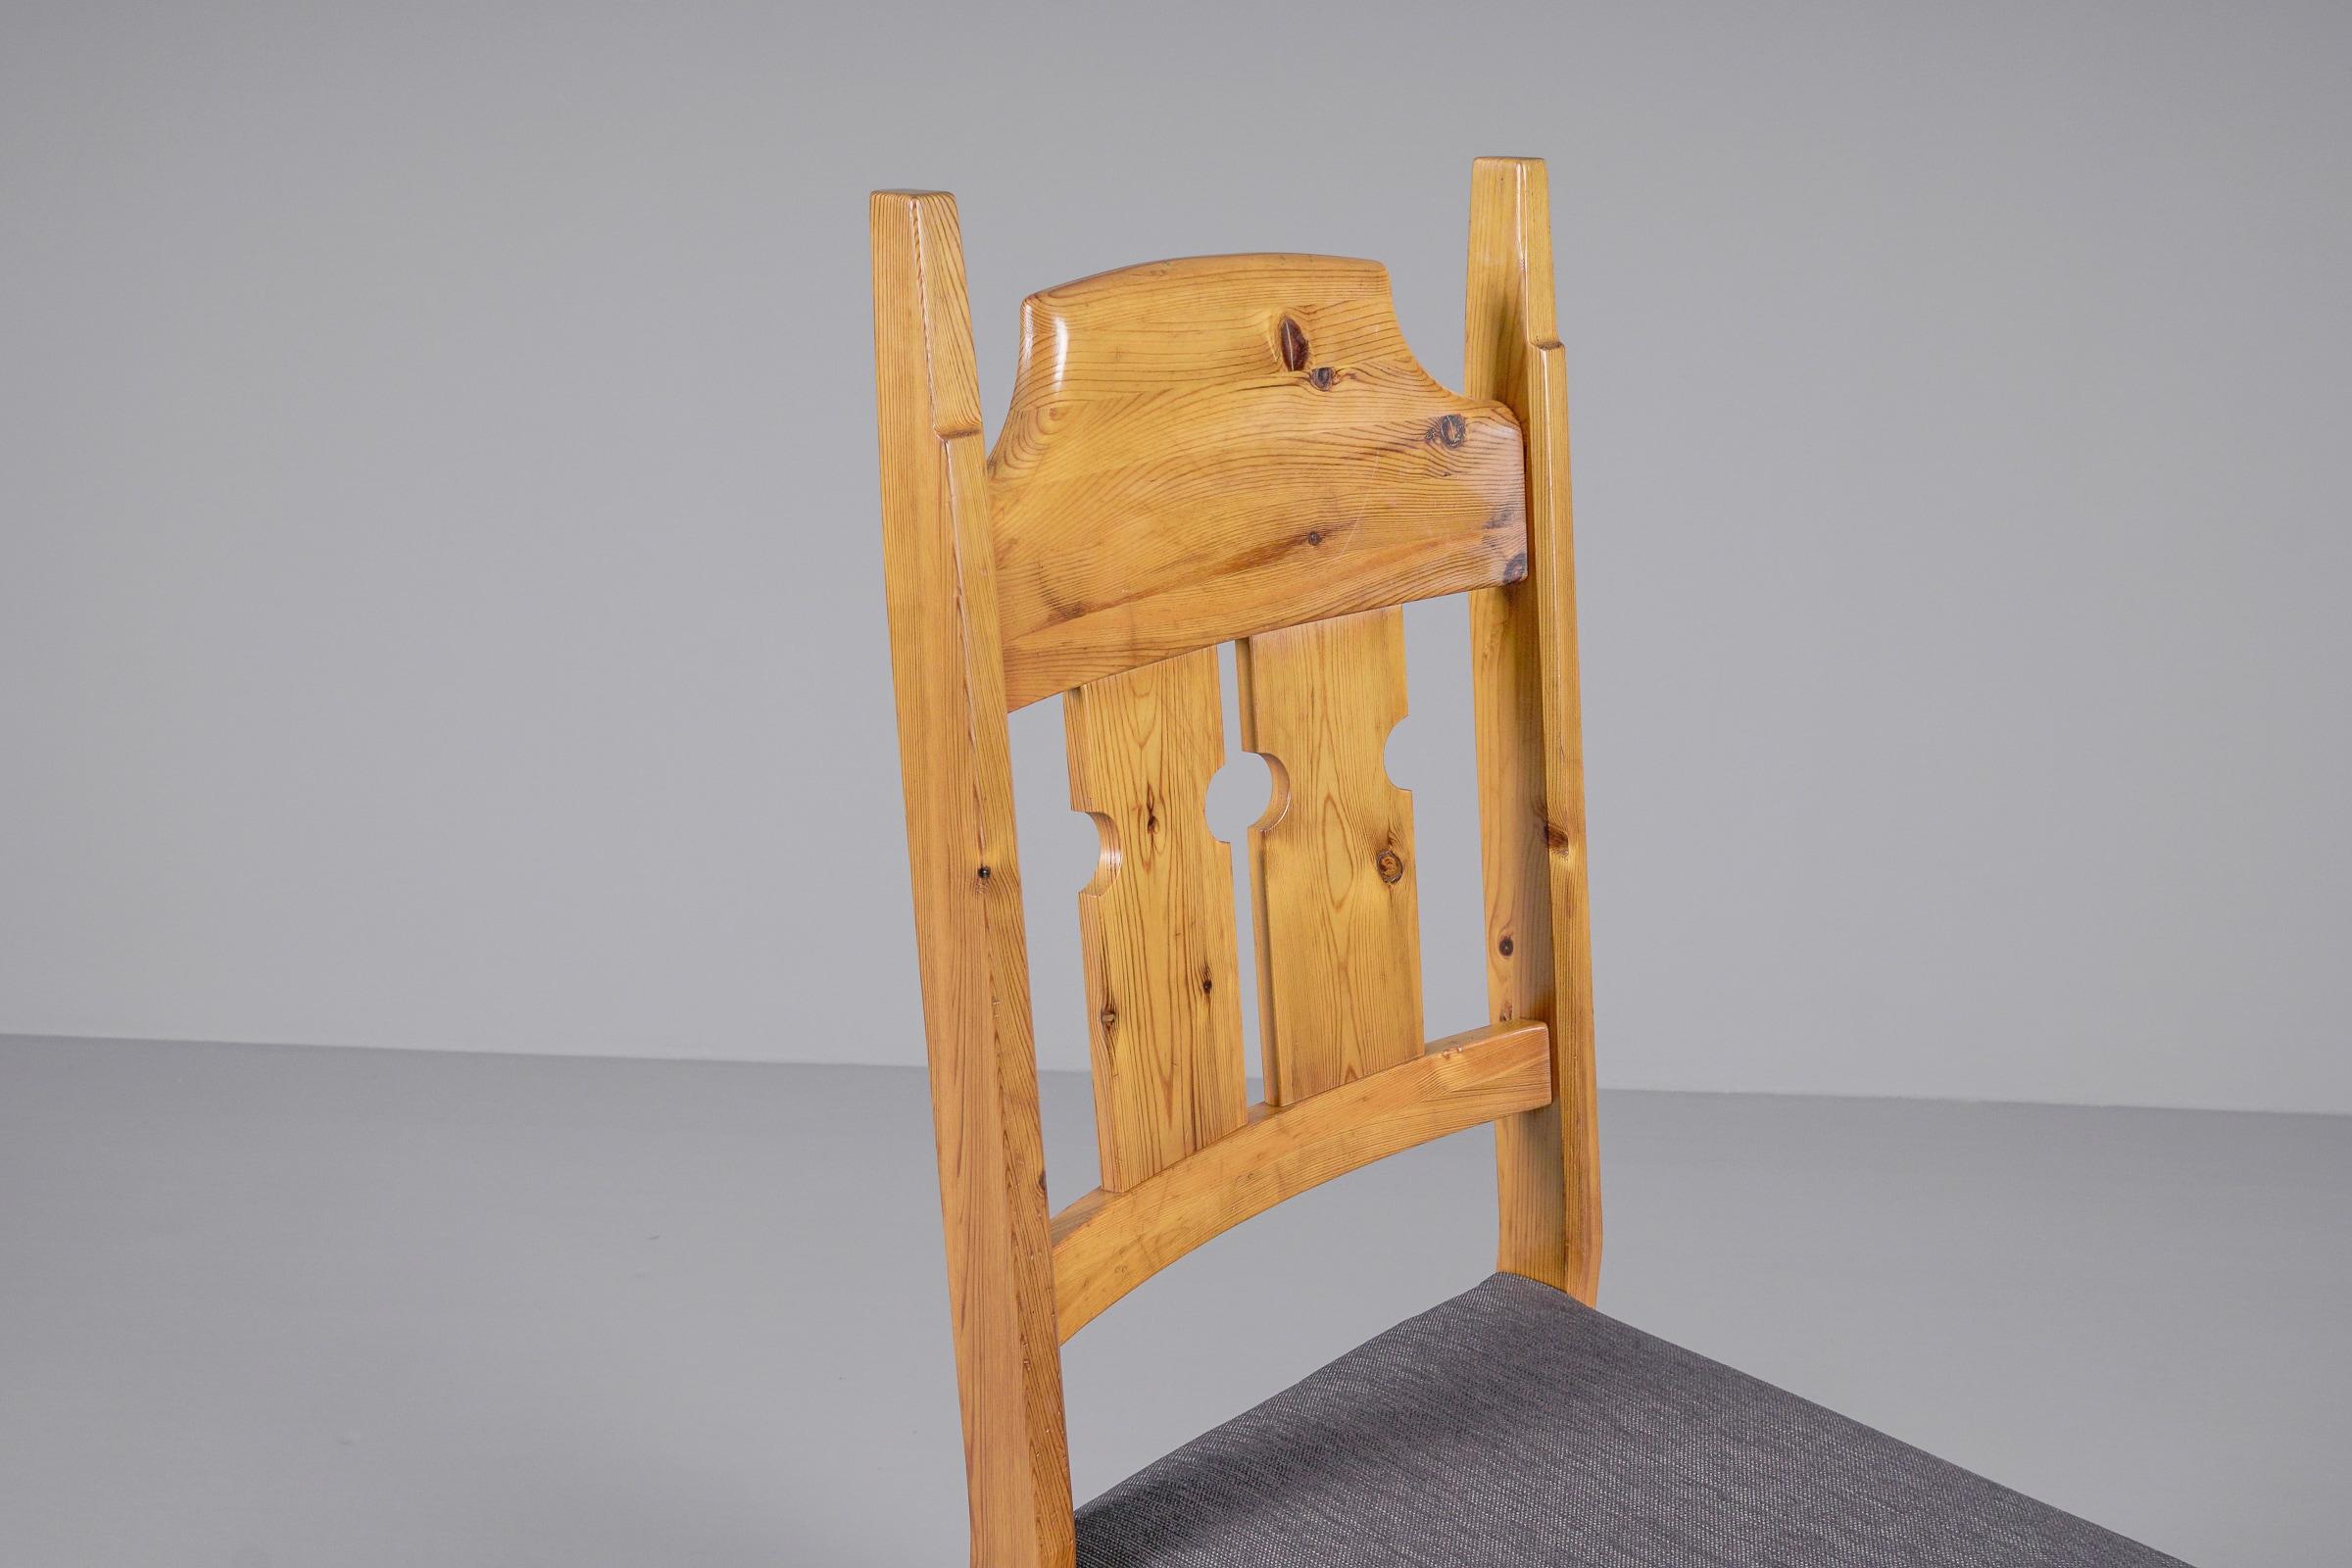  Set of 4 Swedish Pine Chairs by Gilbert Marklund for Furusnickarn AB, 1970s For Sale 12